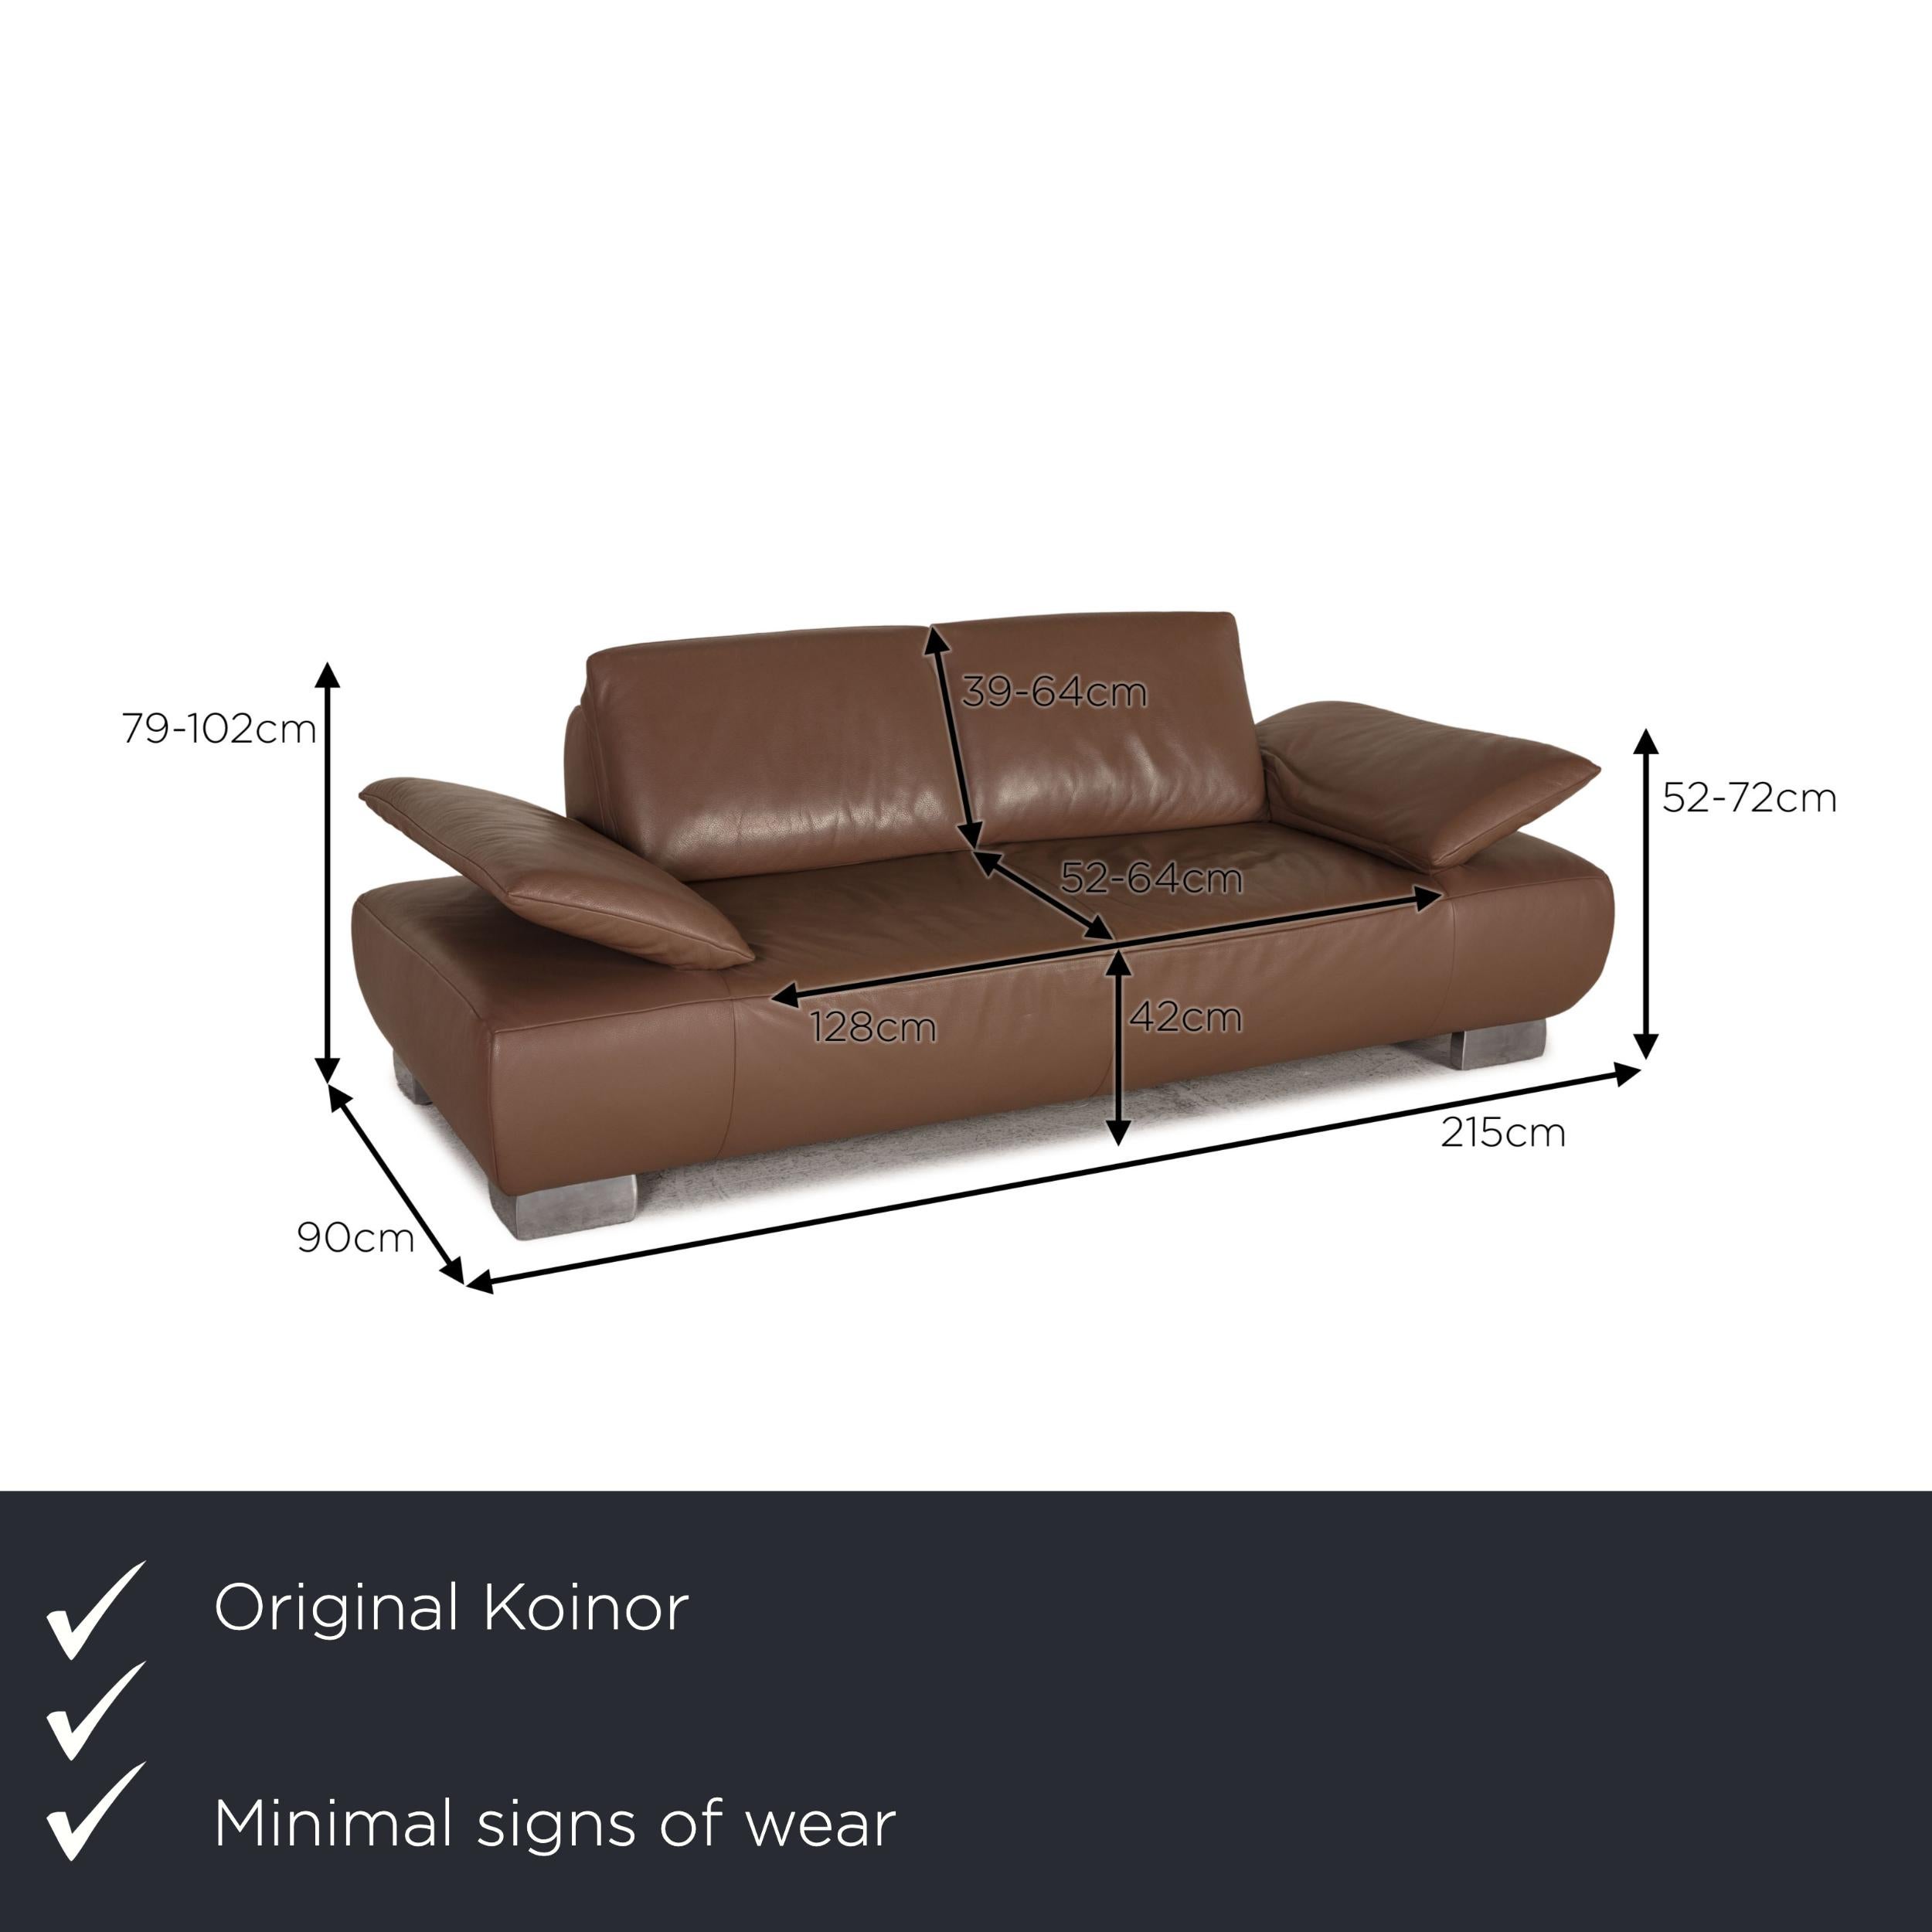 We present to you a Koinor volare leather sofa brown two seater couch.

Product measurements in centimeters:

depth: 90
width: 215
height: 79
seat height: 42
rest height: 52
seat depth: 52
seat width: 128
back height: 39.
 